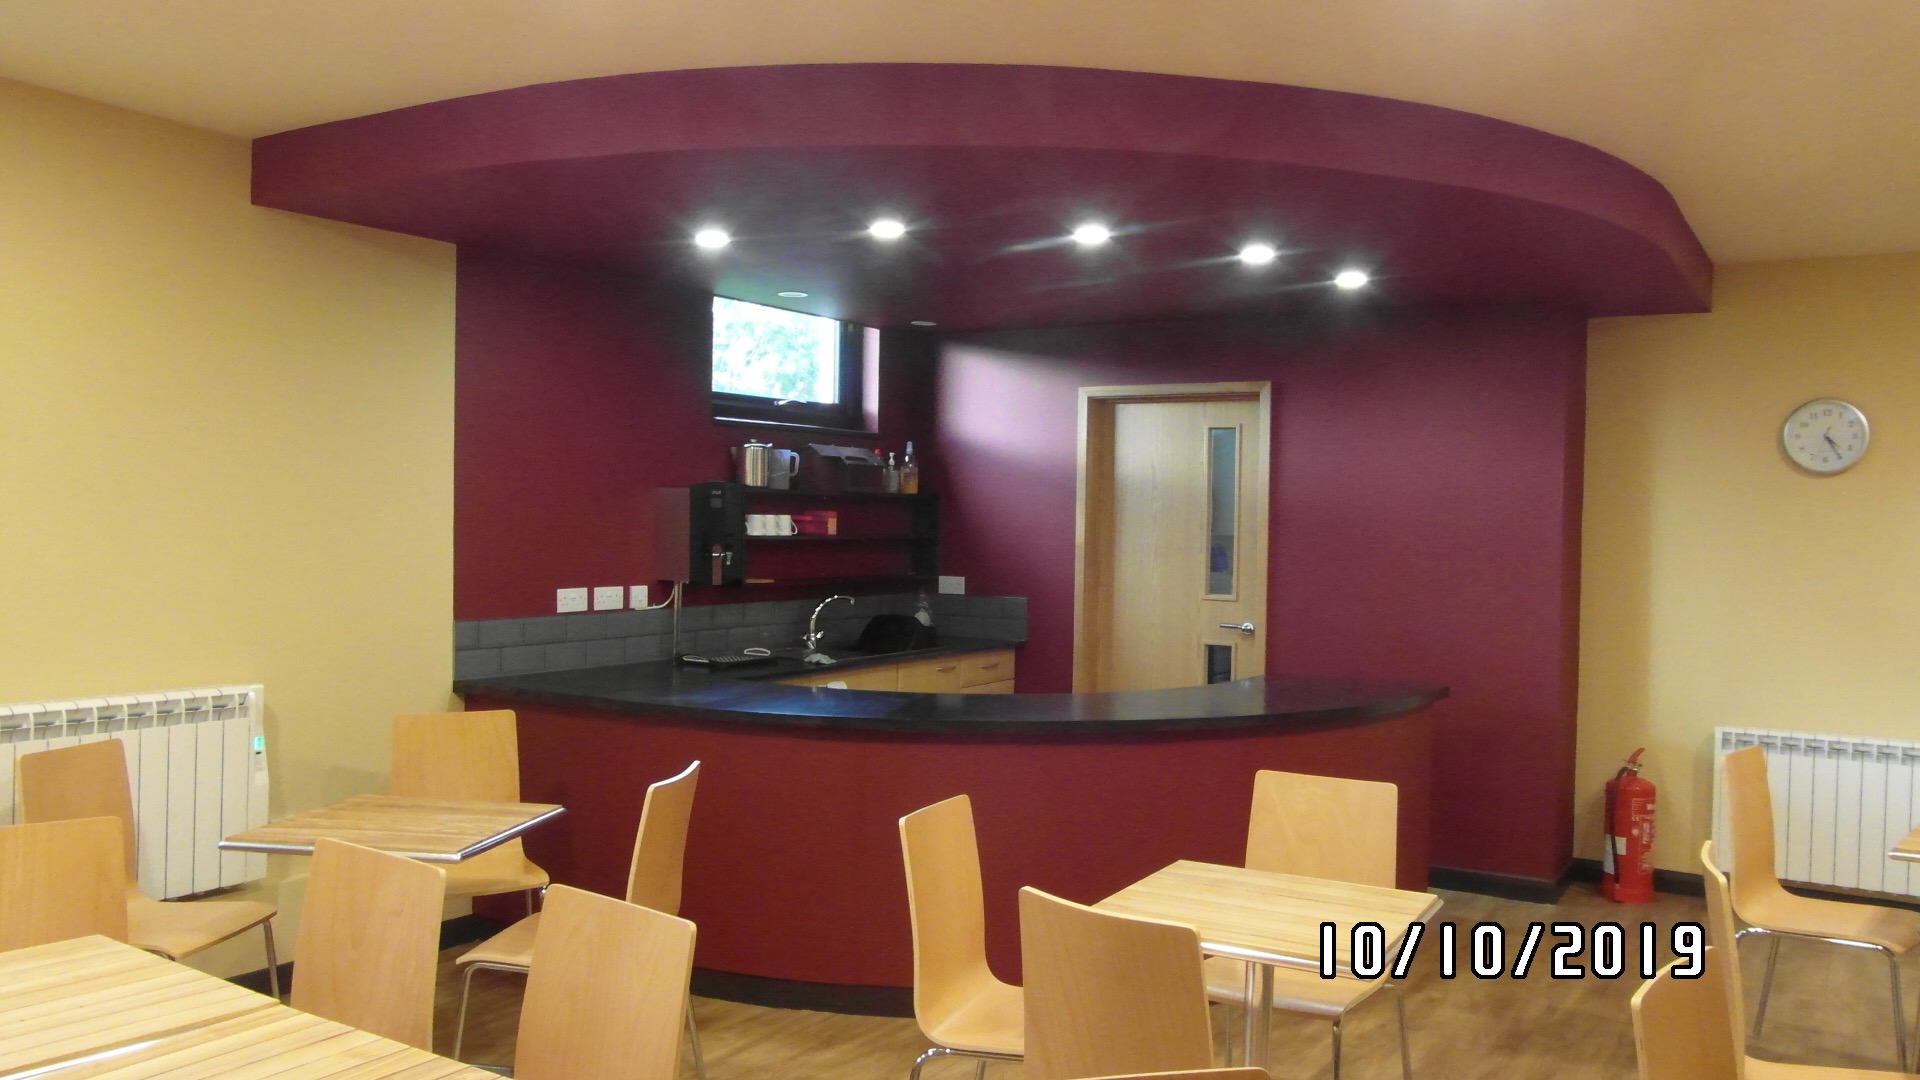 Photo of completed church coffee bar area